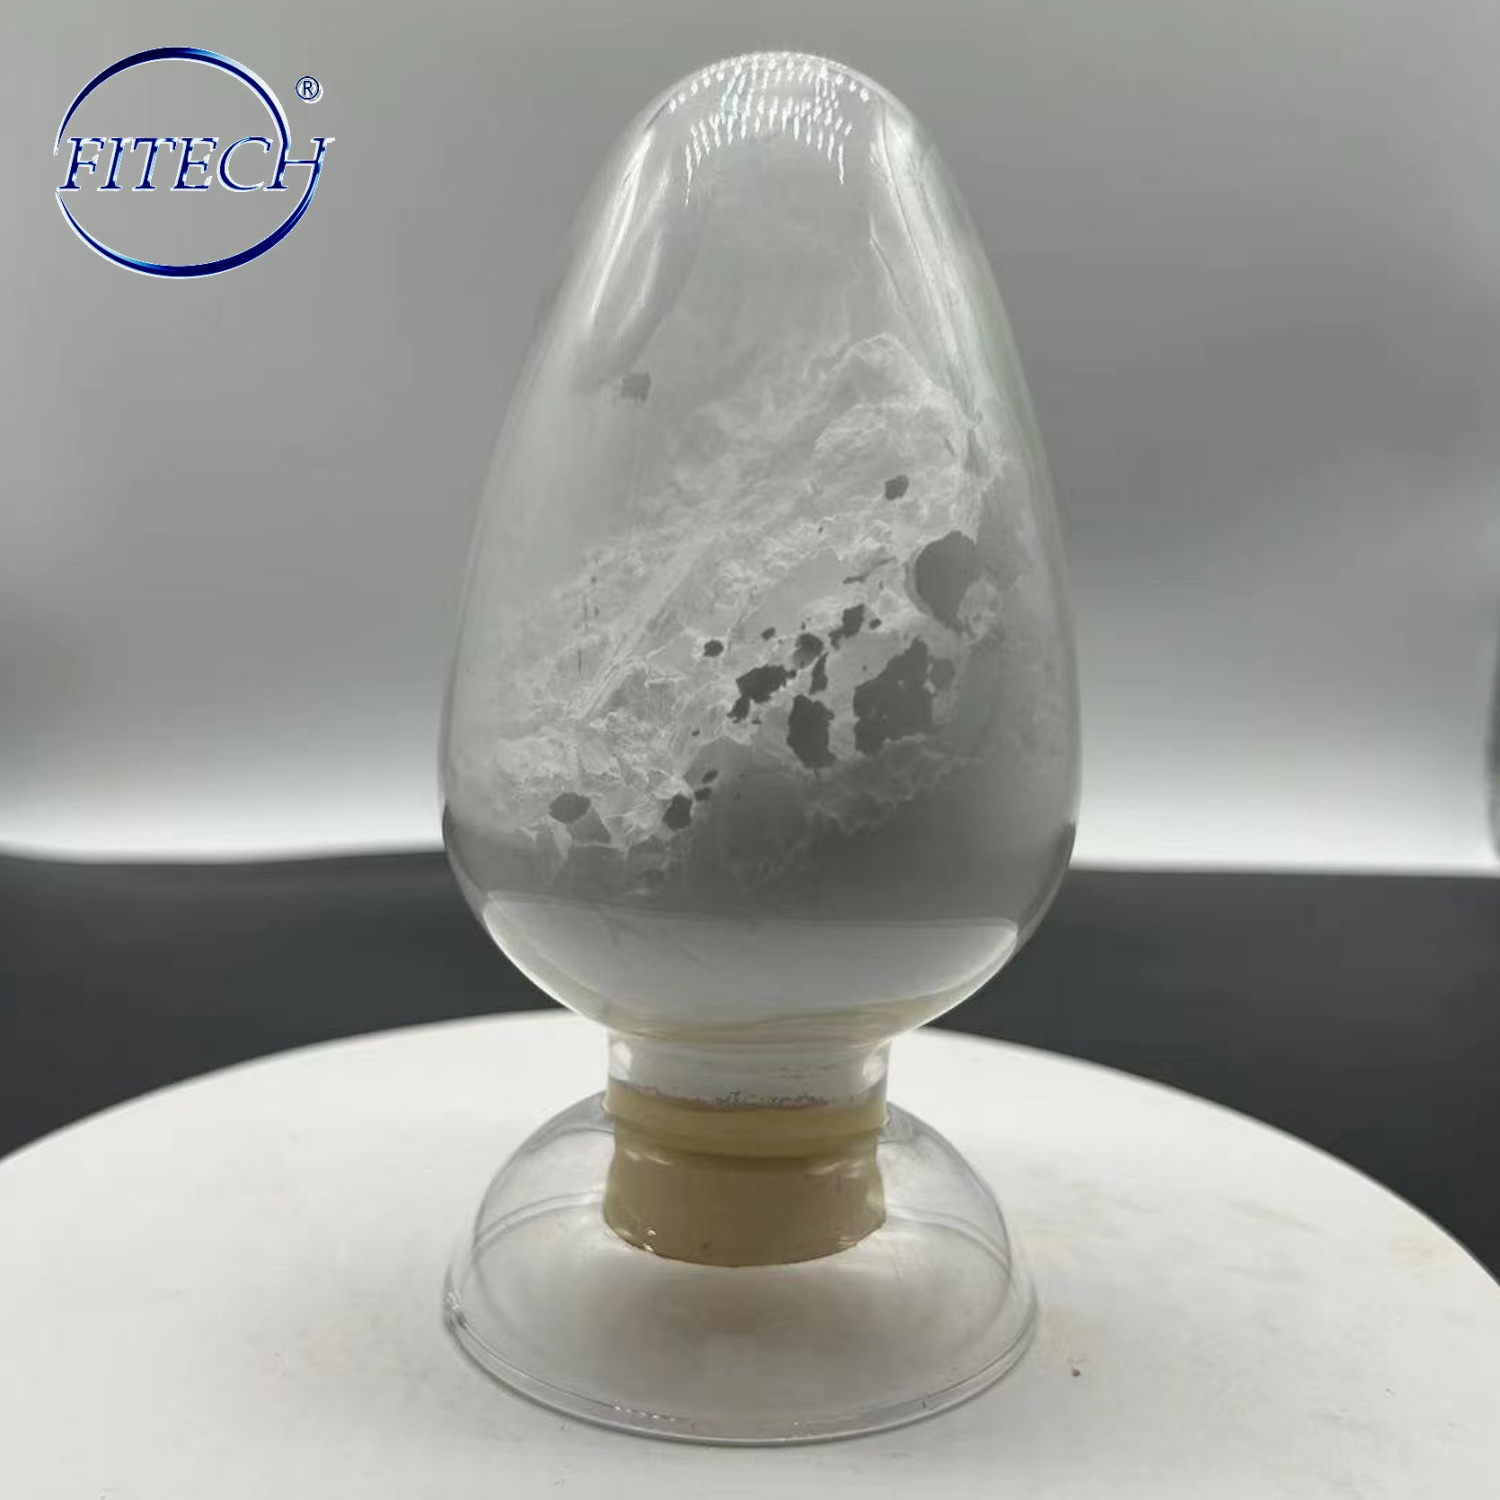 Supply Best Price MgO 20nm-1μm Magnesium Oxide Nanoparticles